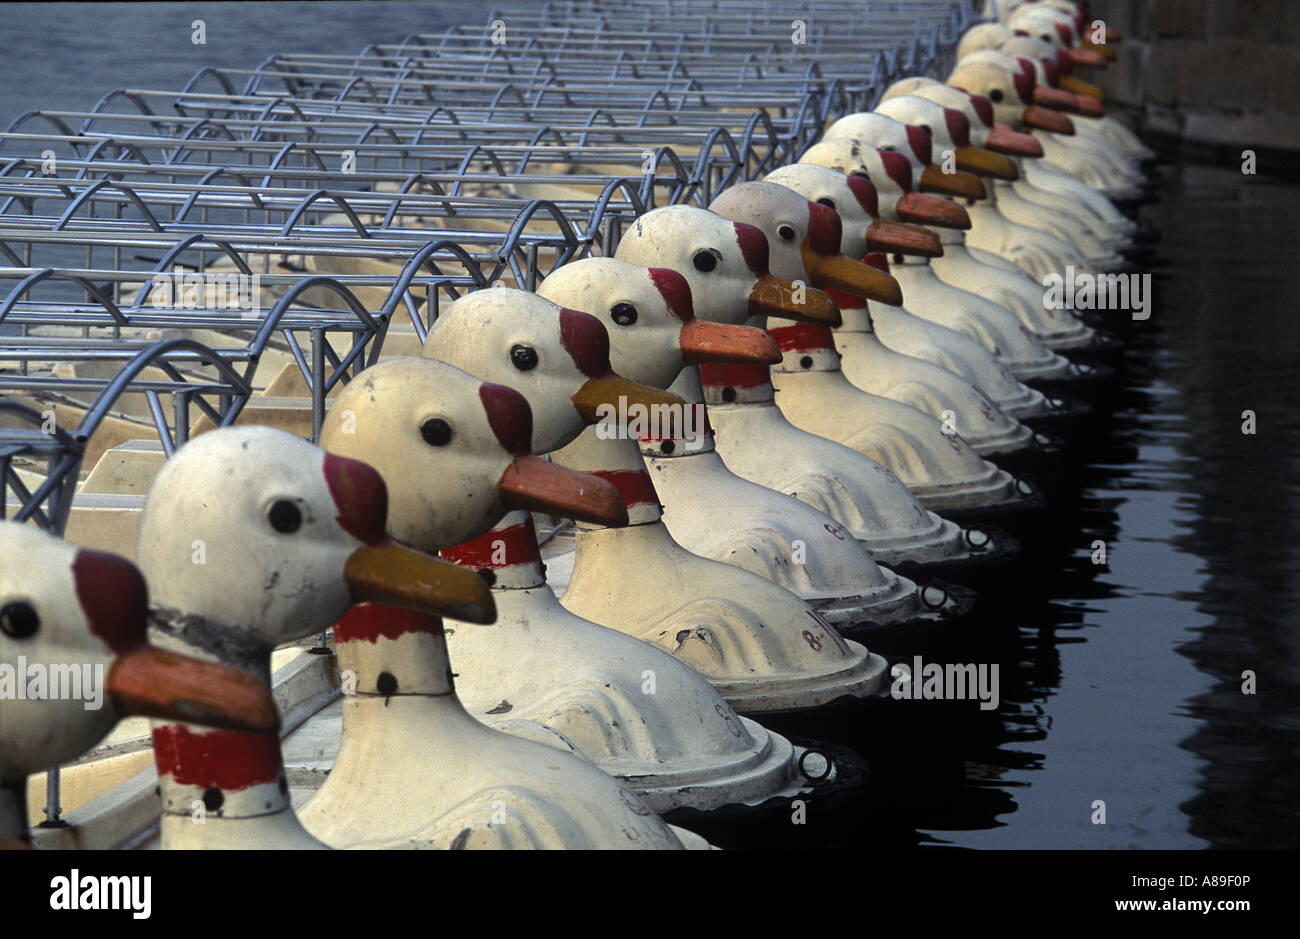 Pedal boats in shape of ducks on a lake near summer palace, Beijing, China Stock Photo